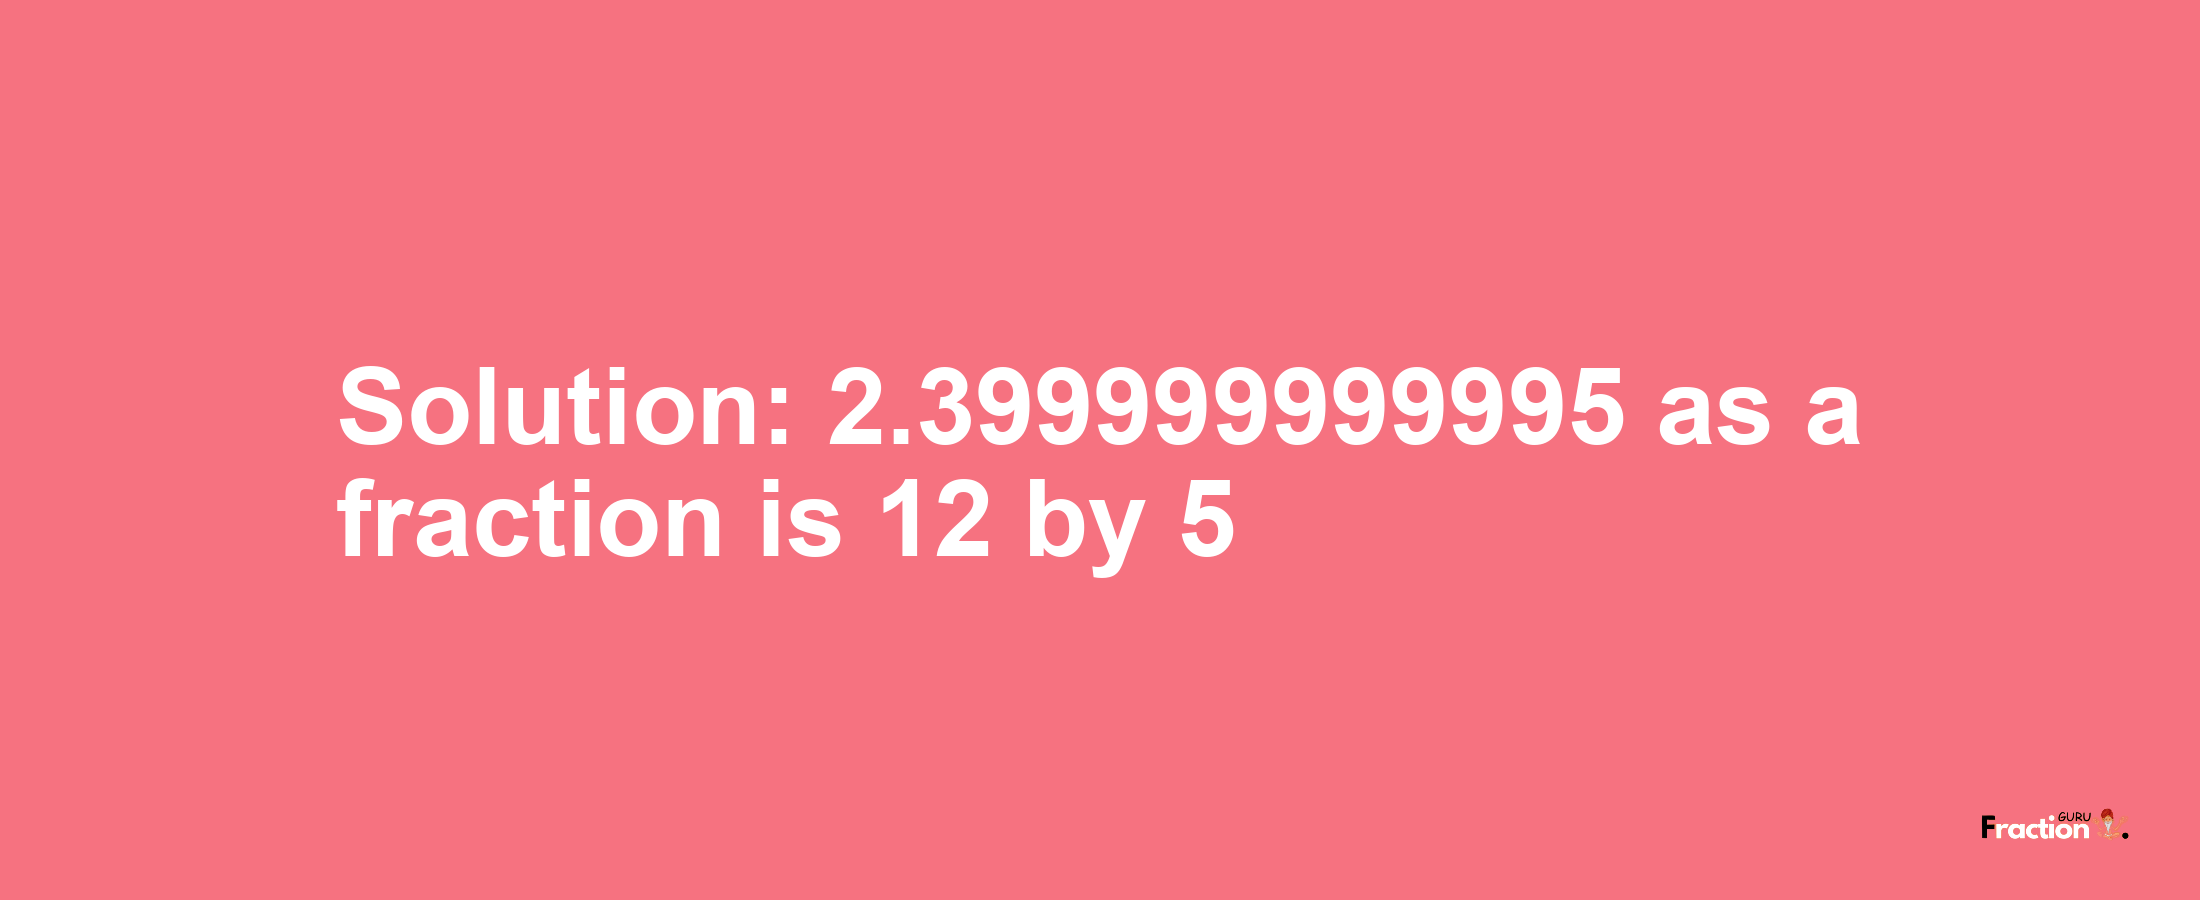 Solution:2.399999999995 as a fraction is 12/5